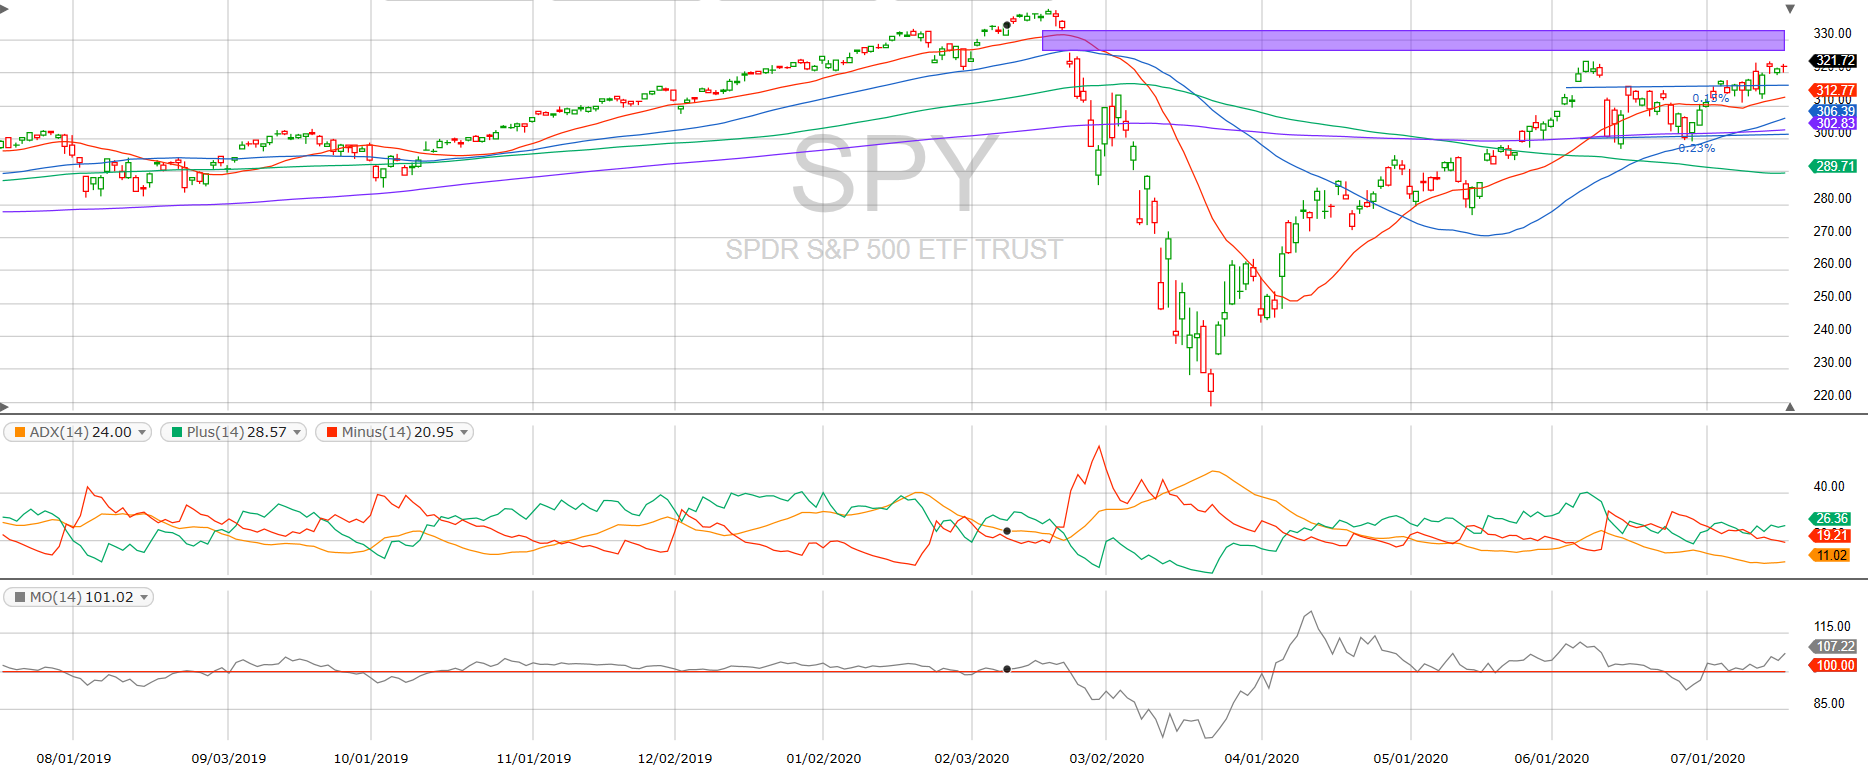 2020-07-17 spy daily.png